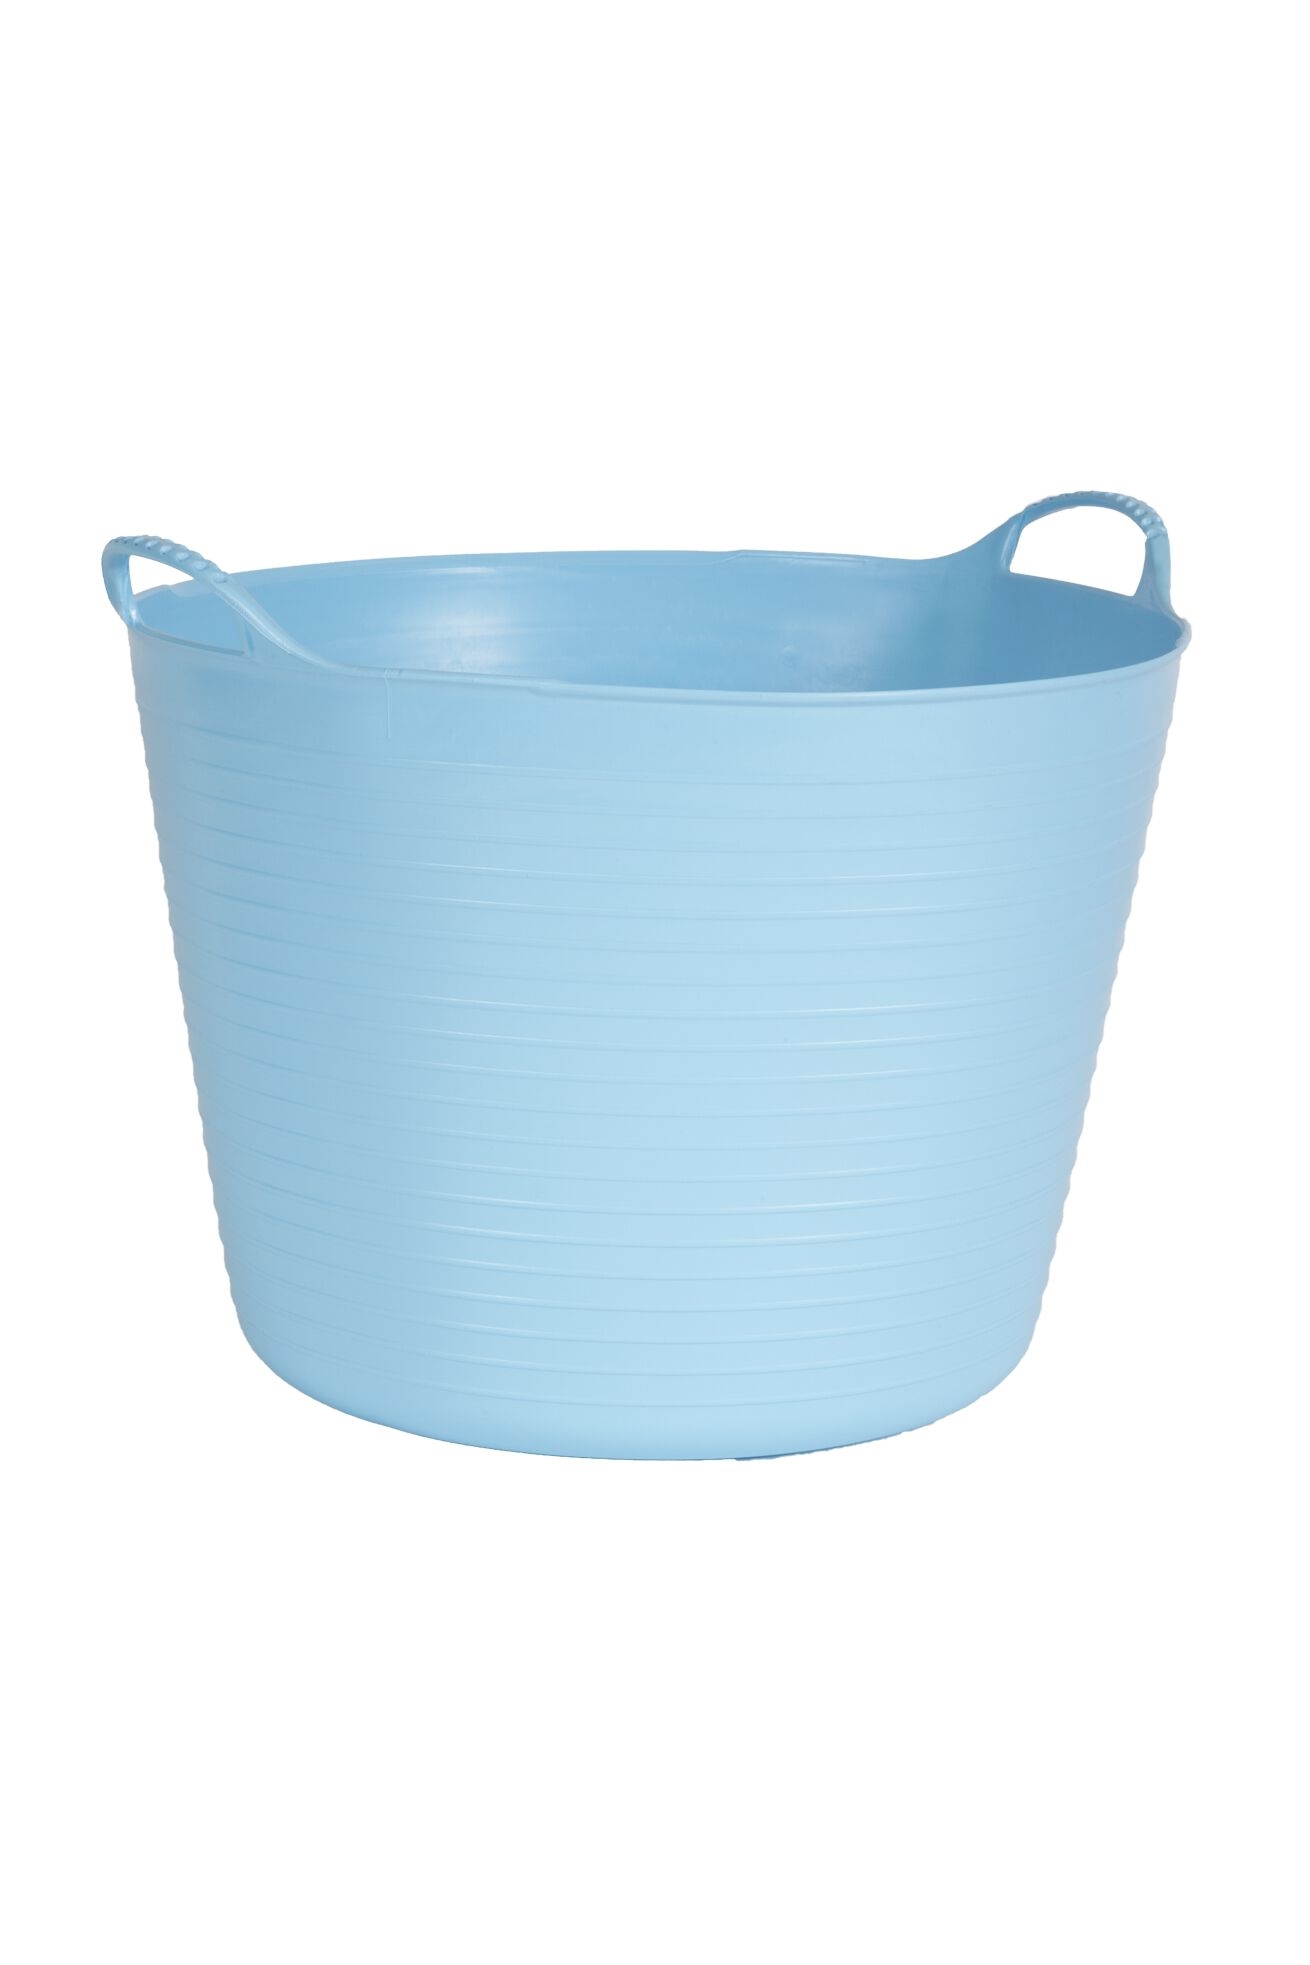 MADE IN UK TRUG 5 SIZES WATER FLEXI TUB FEED CHOOSE YOUR COLOUR BUCKET 